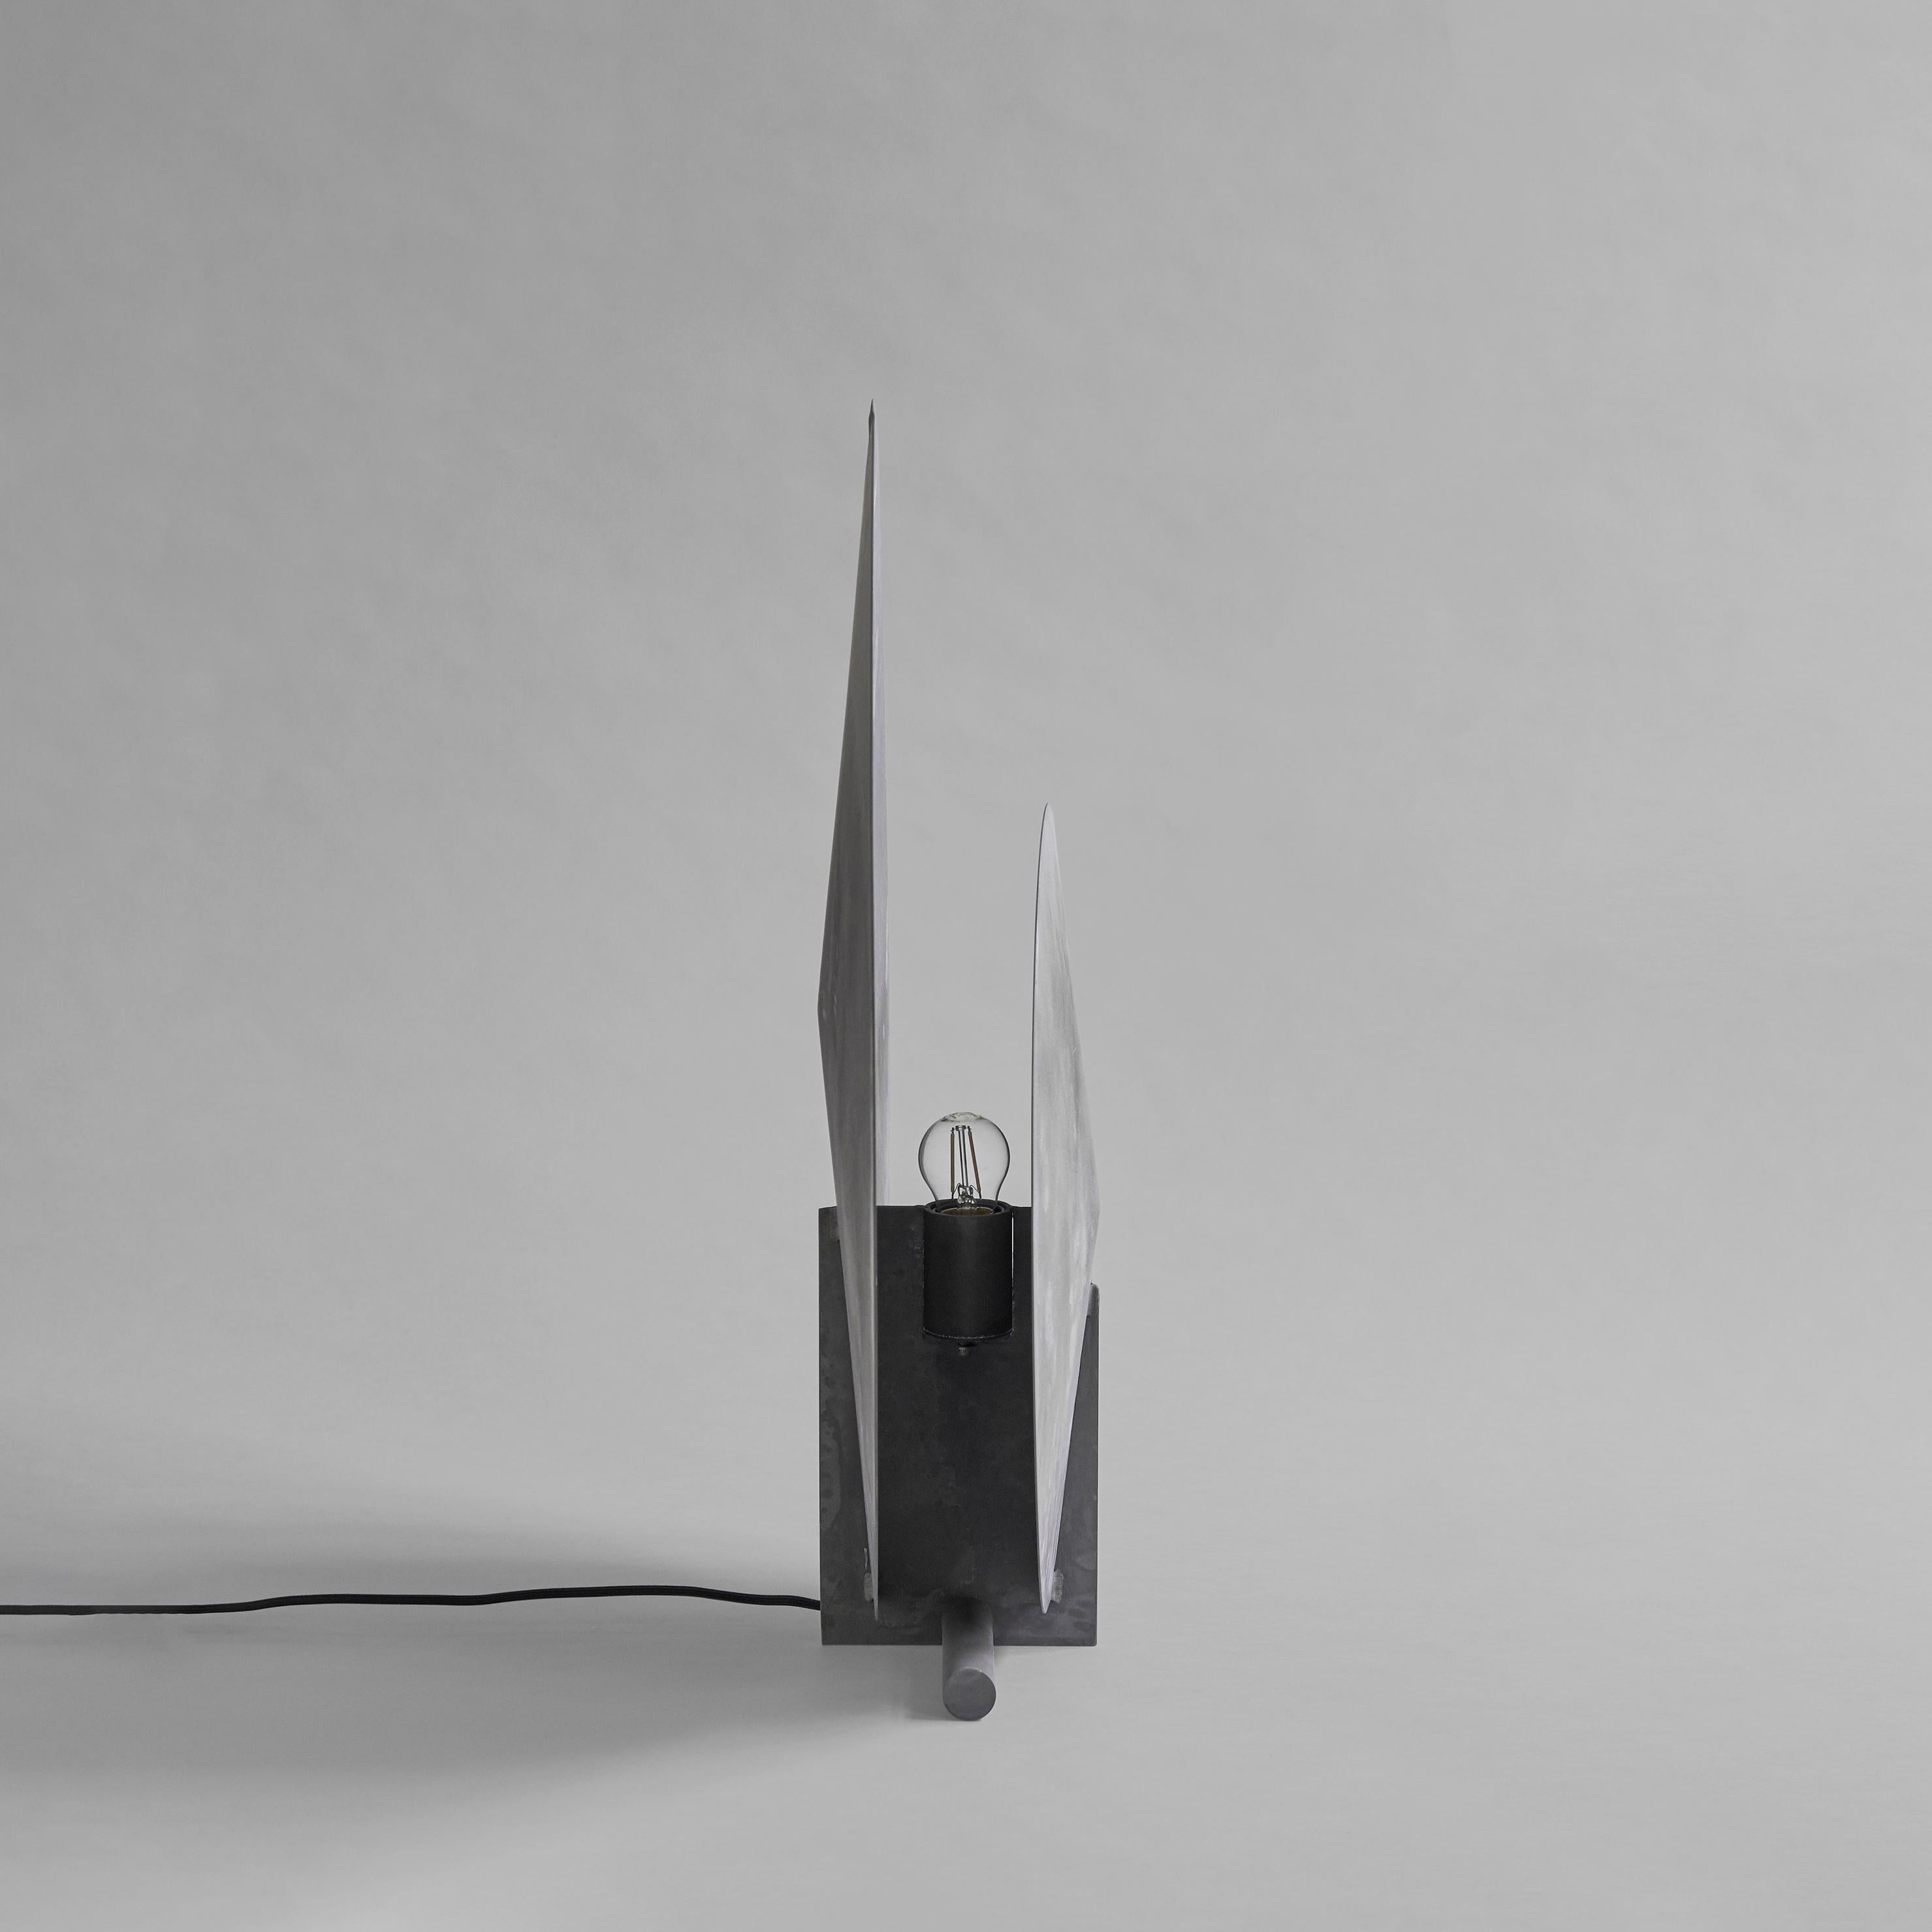 AD floor lamp Oxidized by 101 Copenhagen
Designed by Kristian Sofus Hansen & Tommy Hyldahl.
Dimensions: L 60 x W 12 x H 62 cm
Cable length: 200cm.
This product is not wired for USA
Materials: metal: oxidized aluminium / grey
Cable: fabric covered